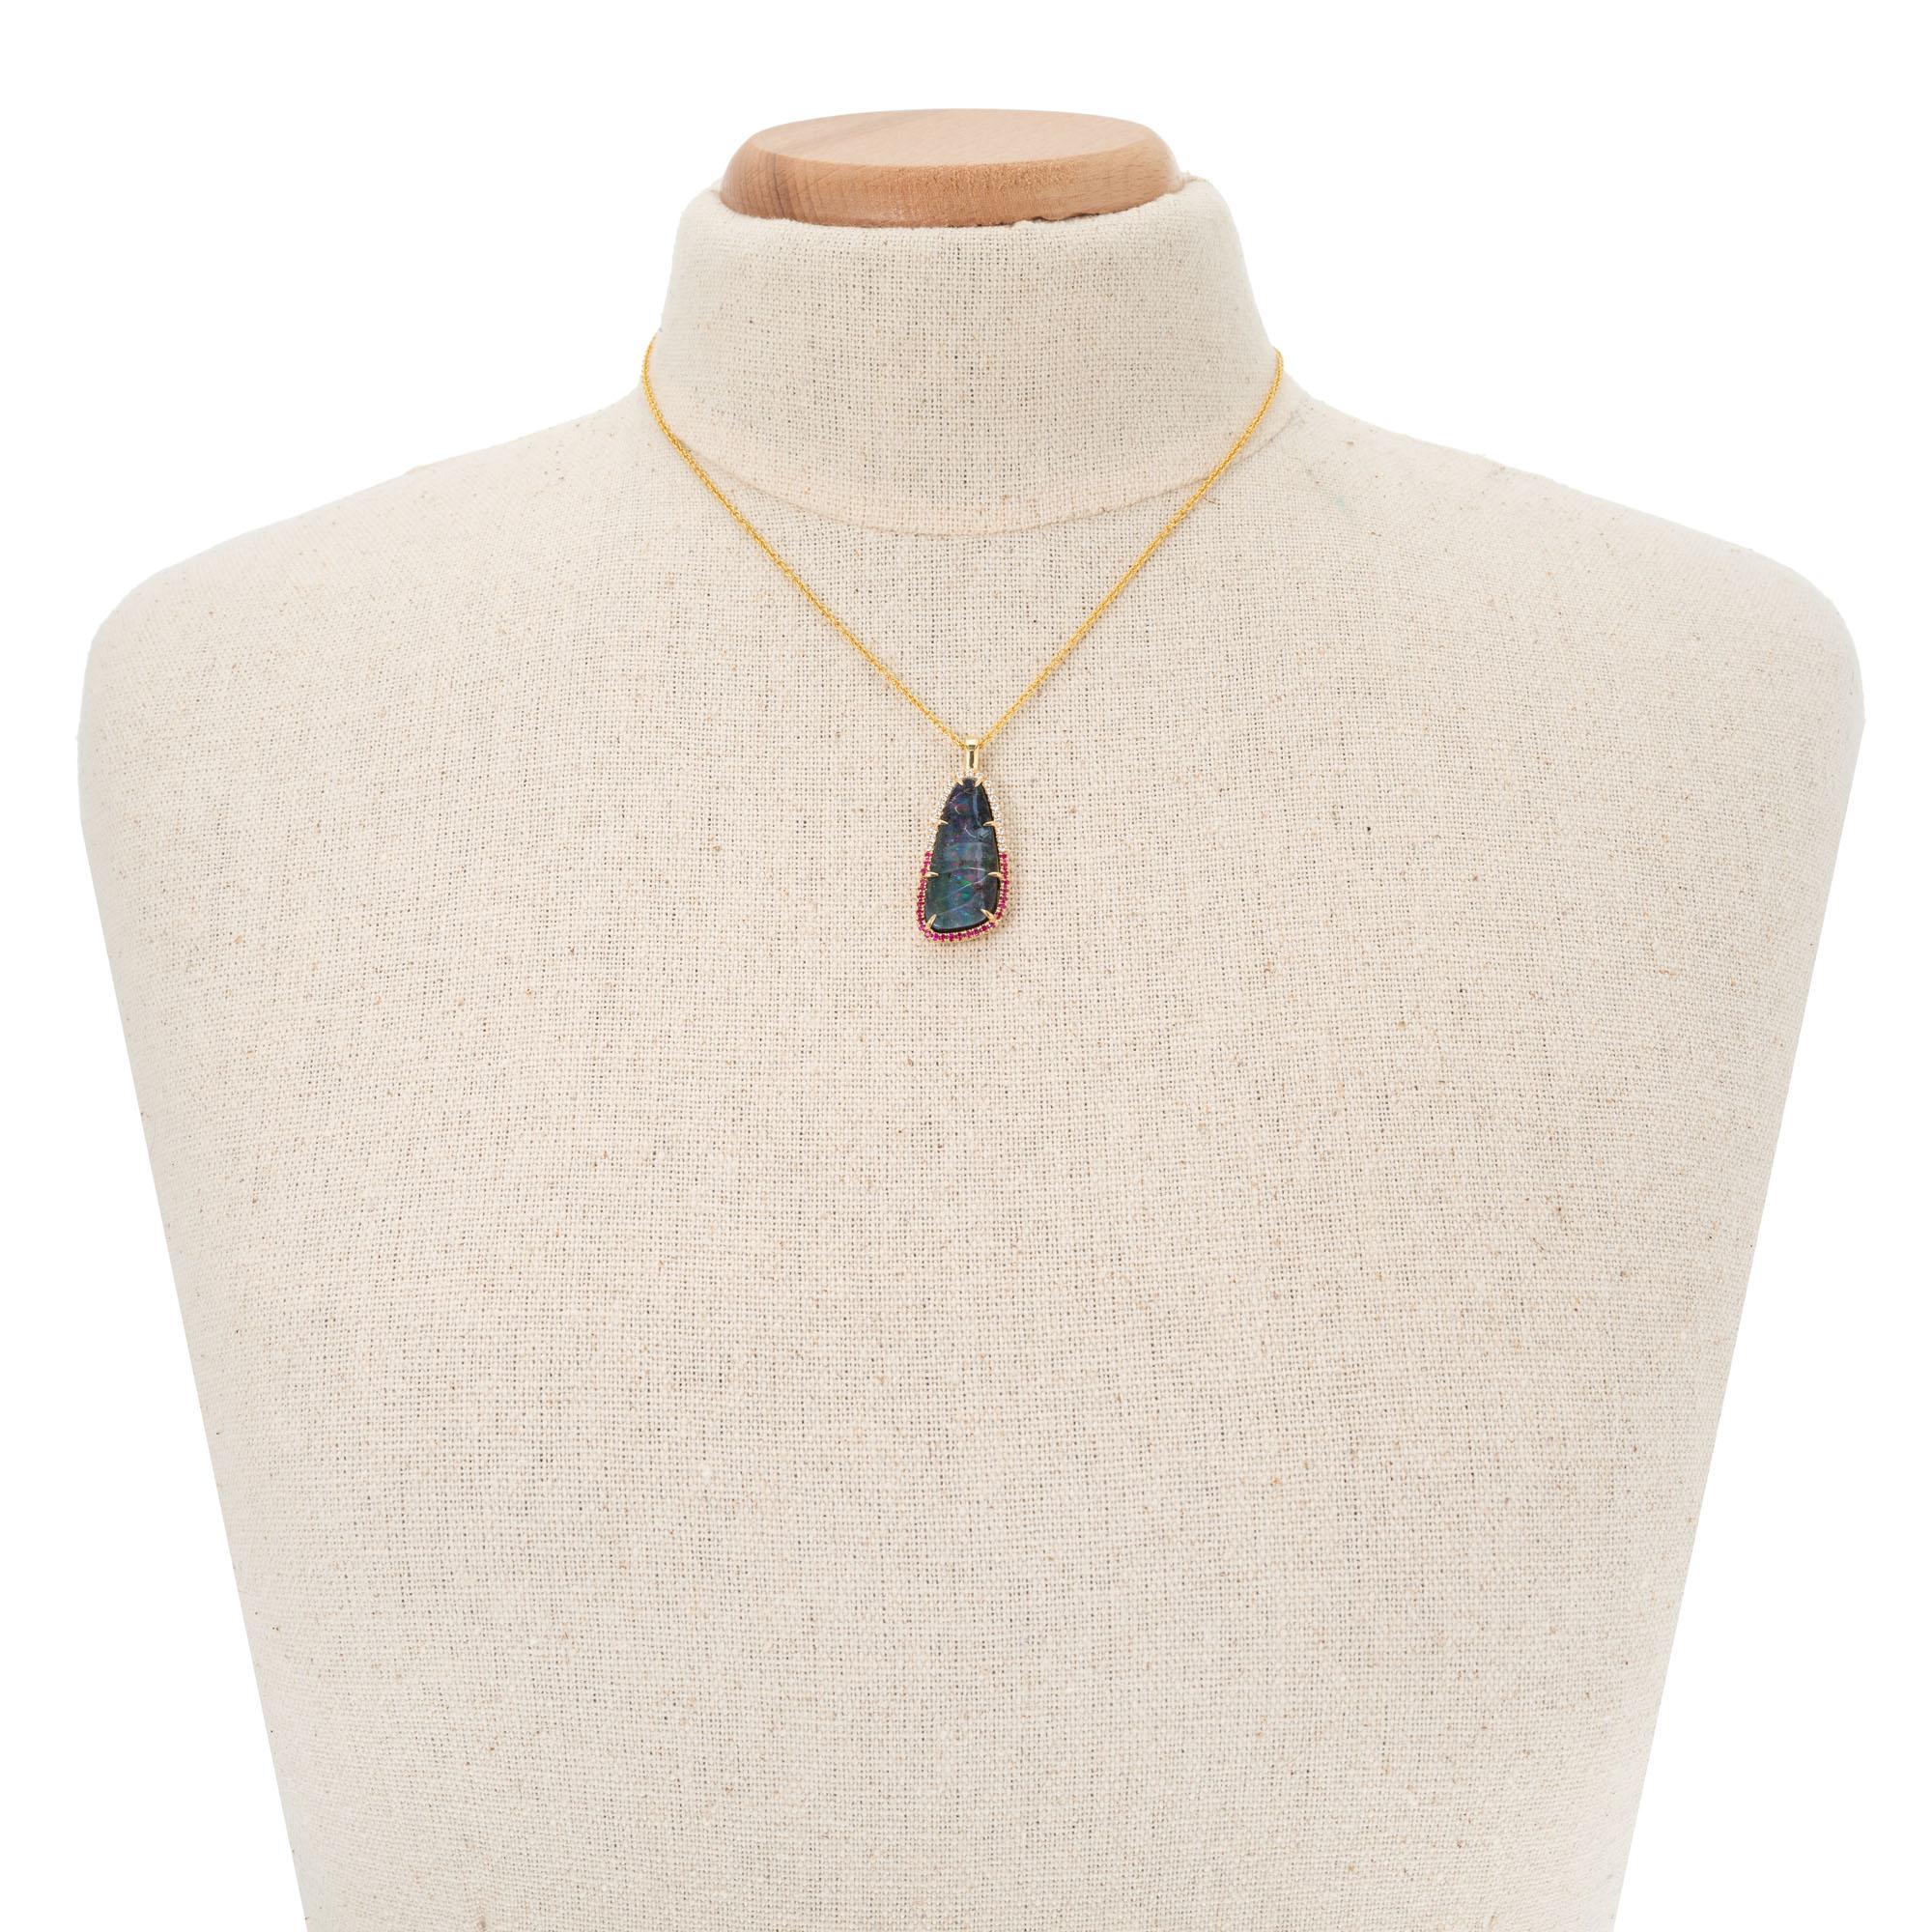 Peter Suchy 8.16 Carat Boulder Opal Ruby Diamond Yellow Gold Pendant Necklace In New Condition For Sale In Stamford, CT